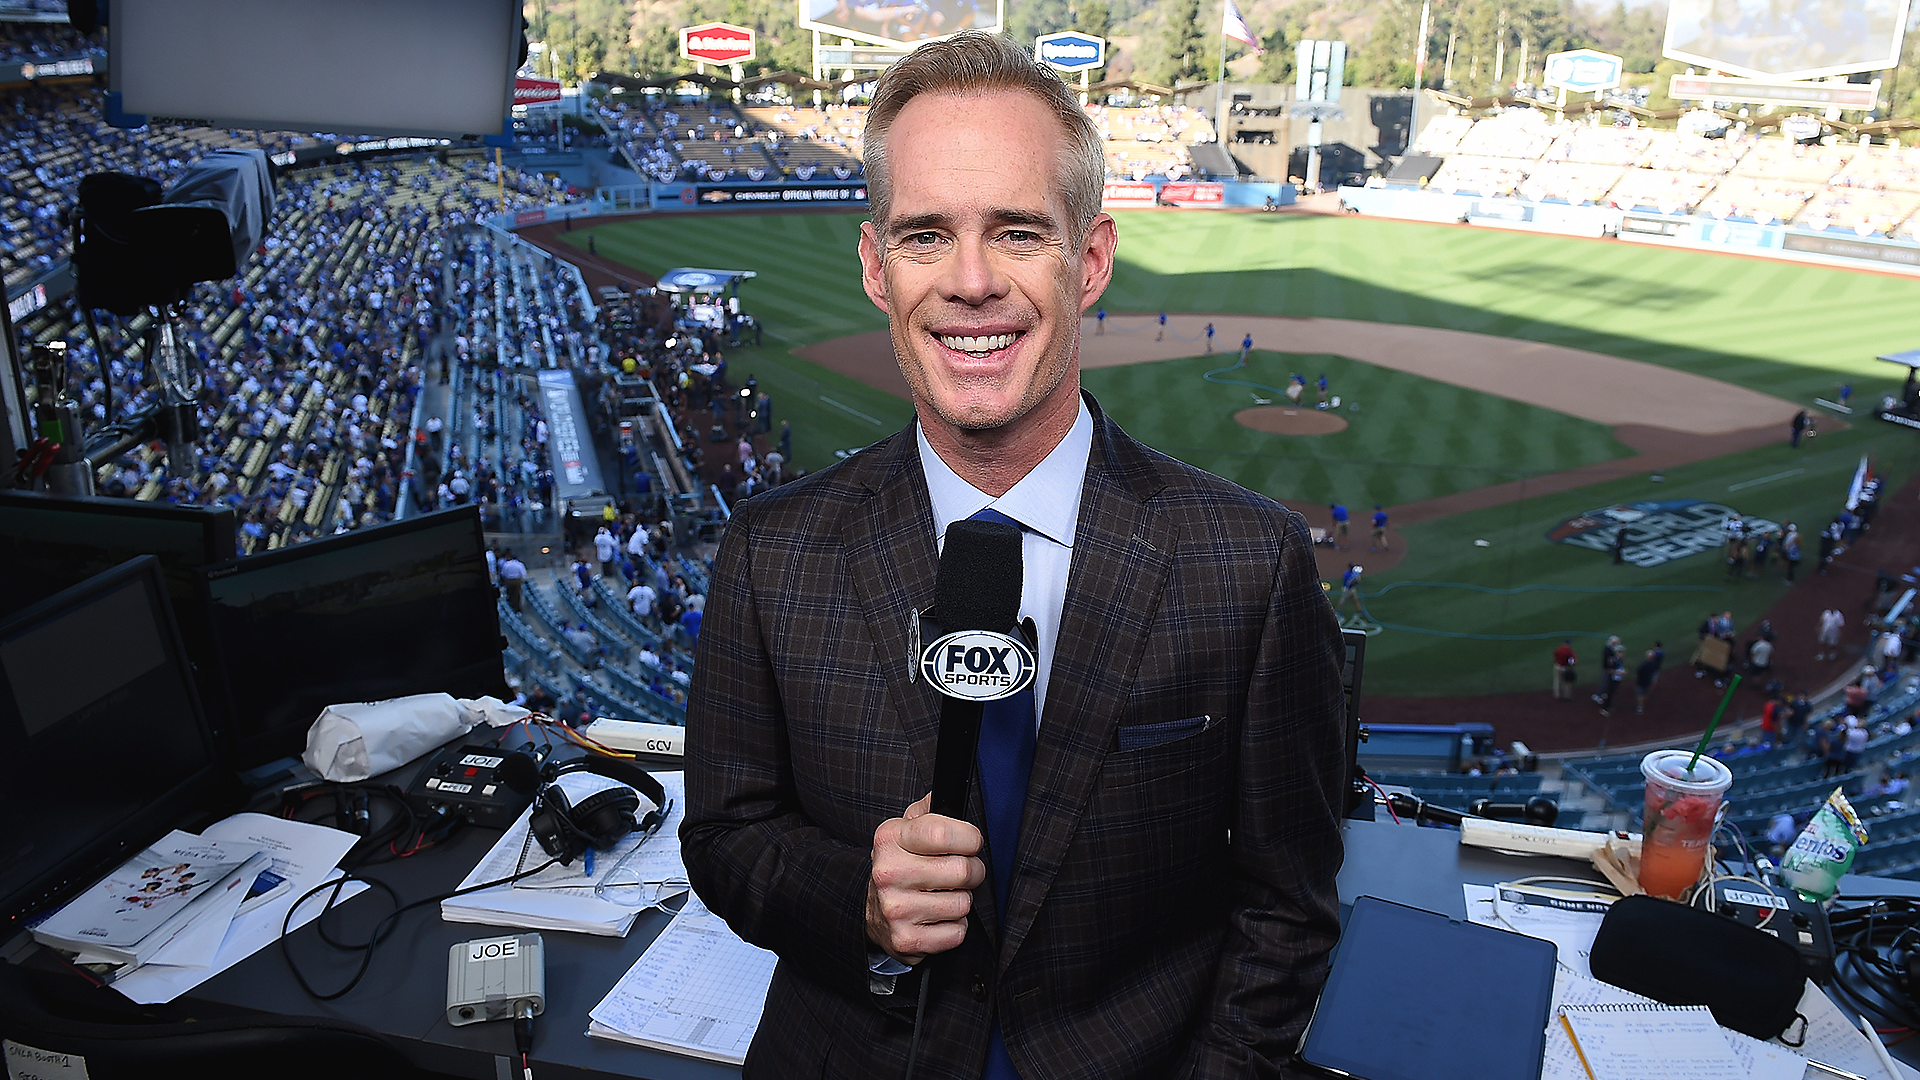 Joe Buck will call World Series or NFL games every single day this week